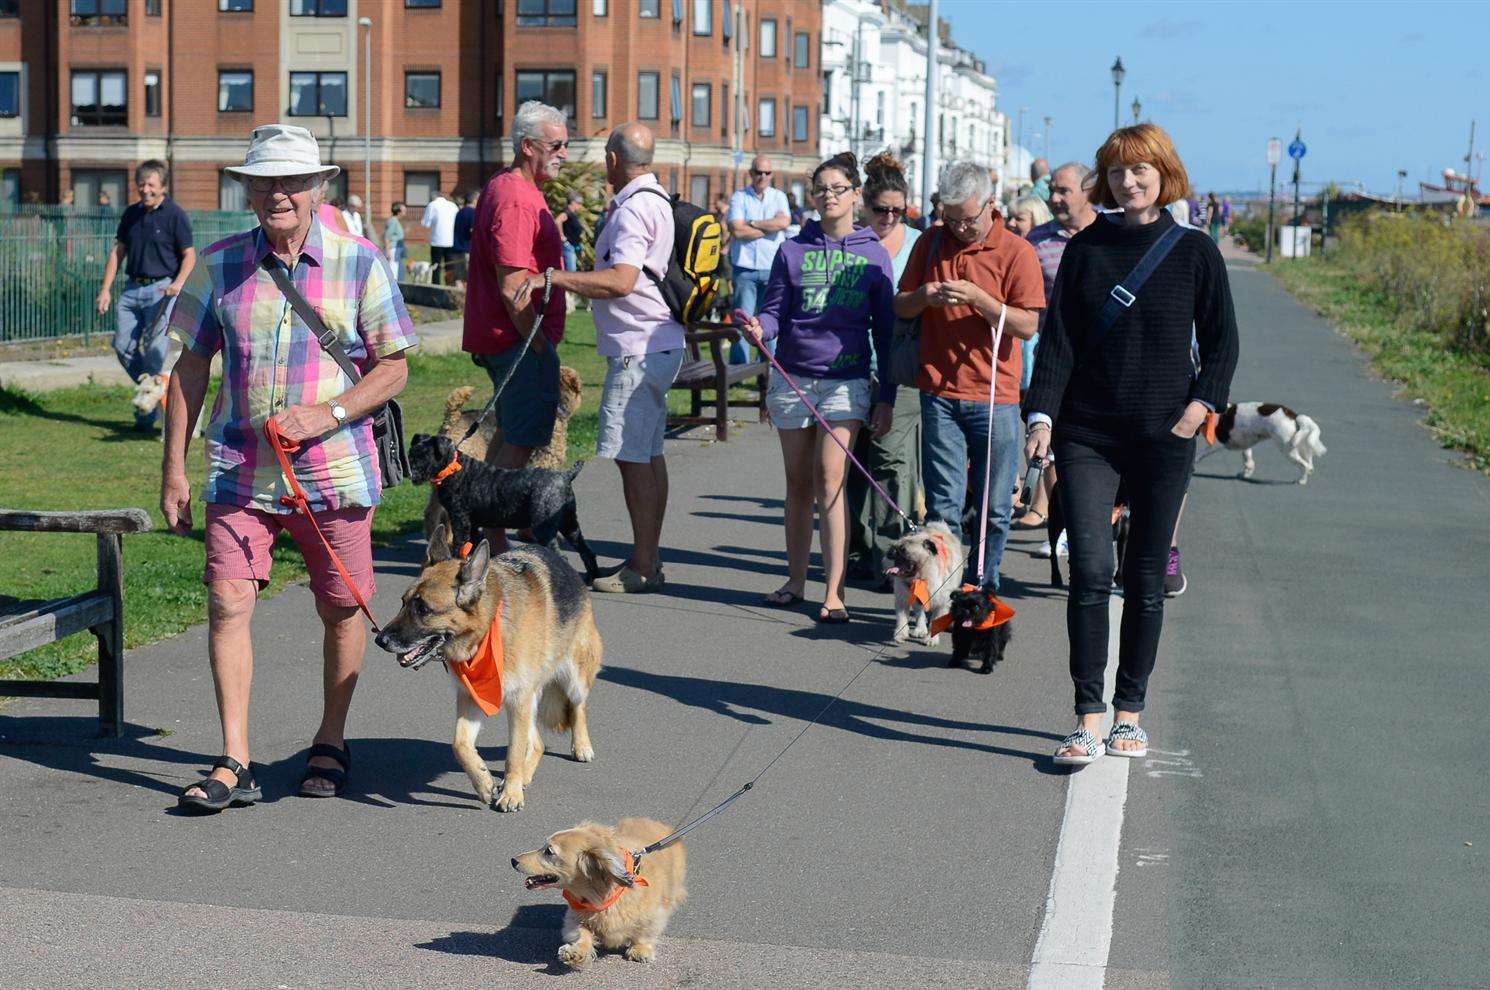 Dog walkers who had protested against some of the proposed new orders